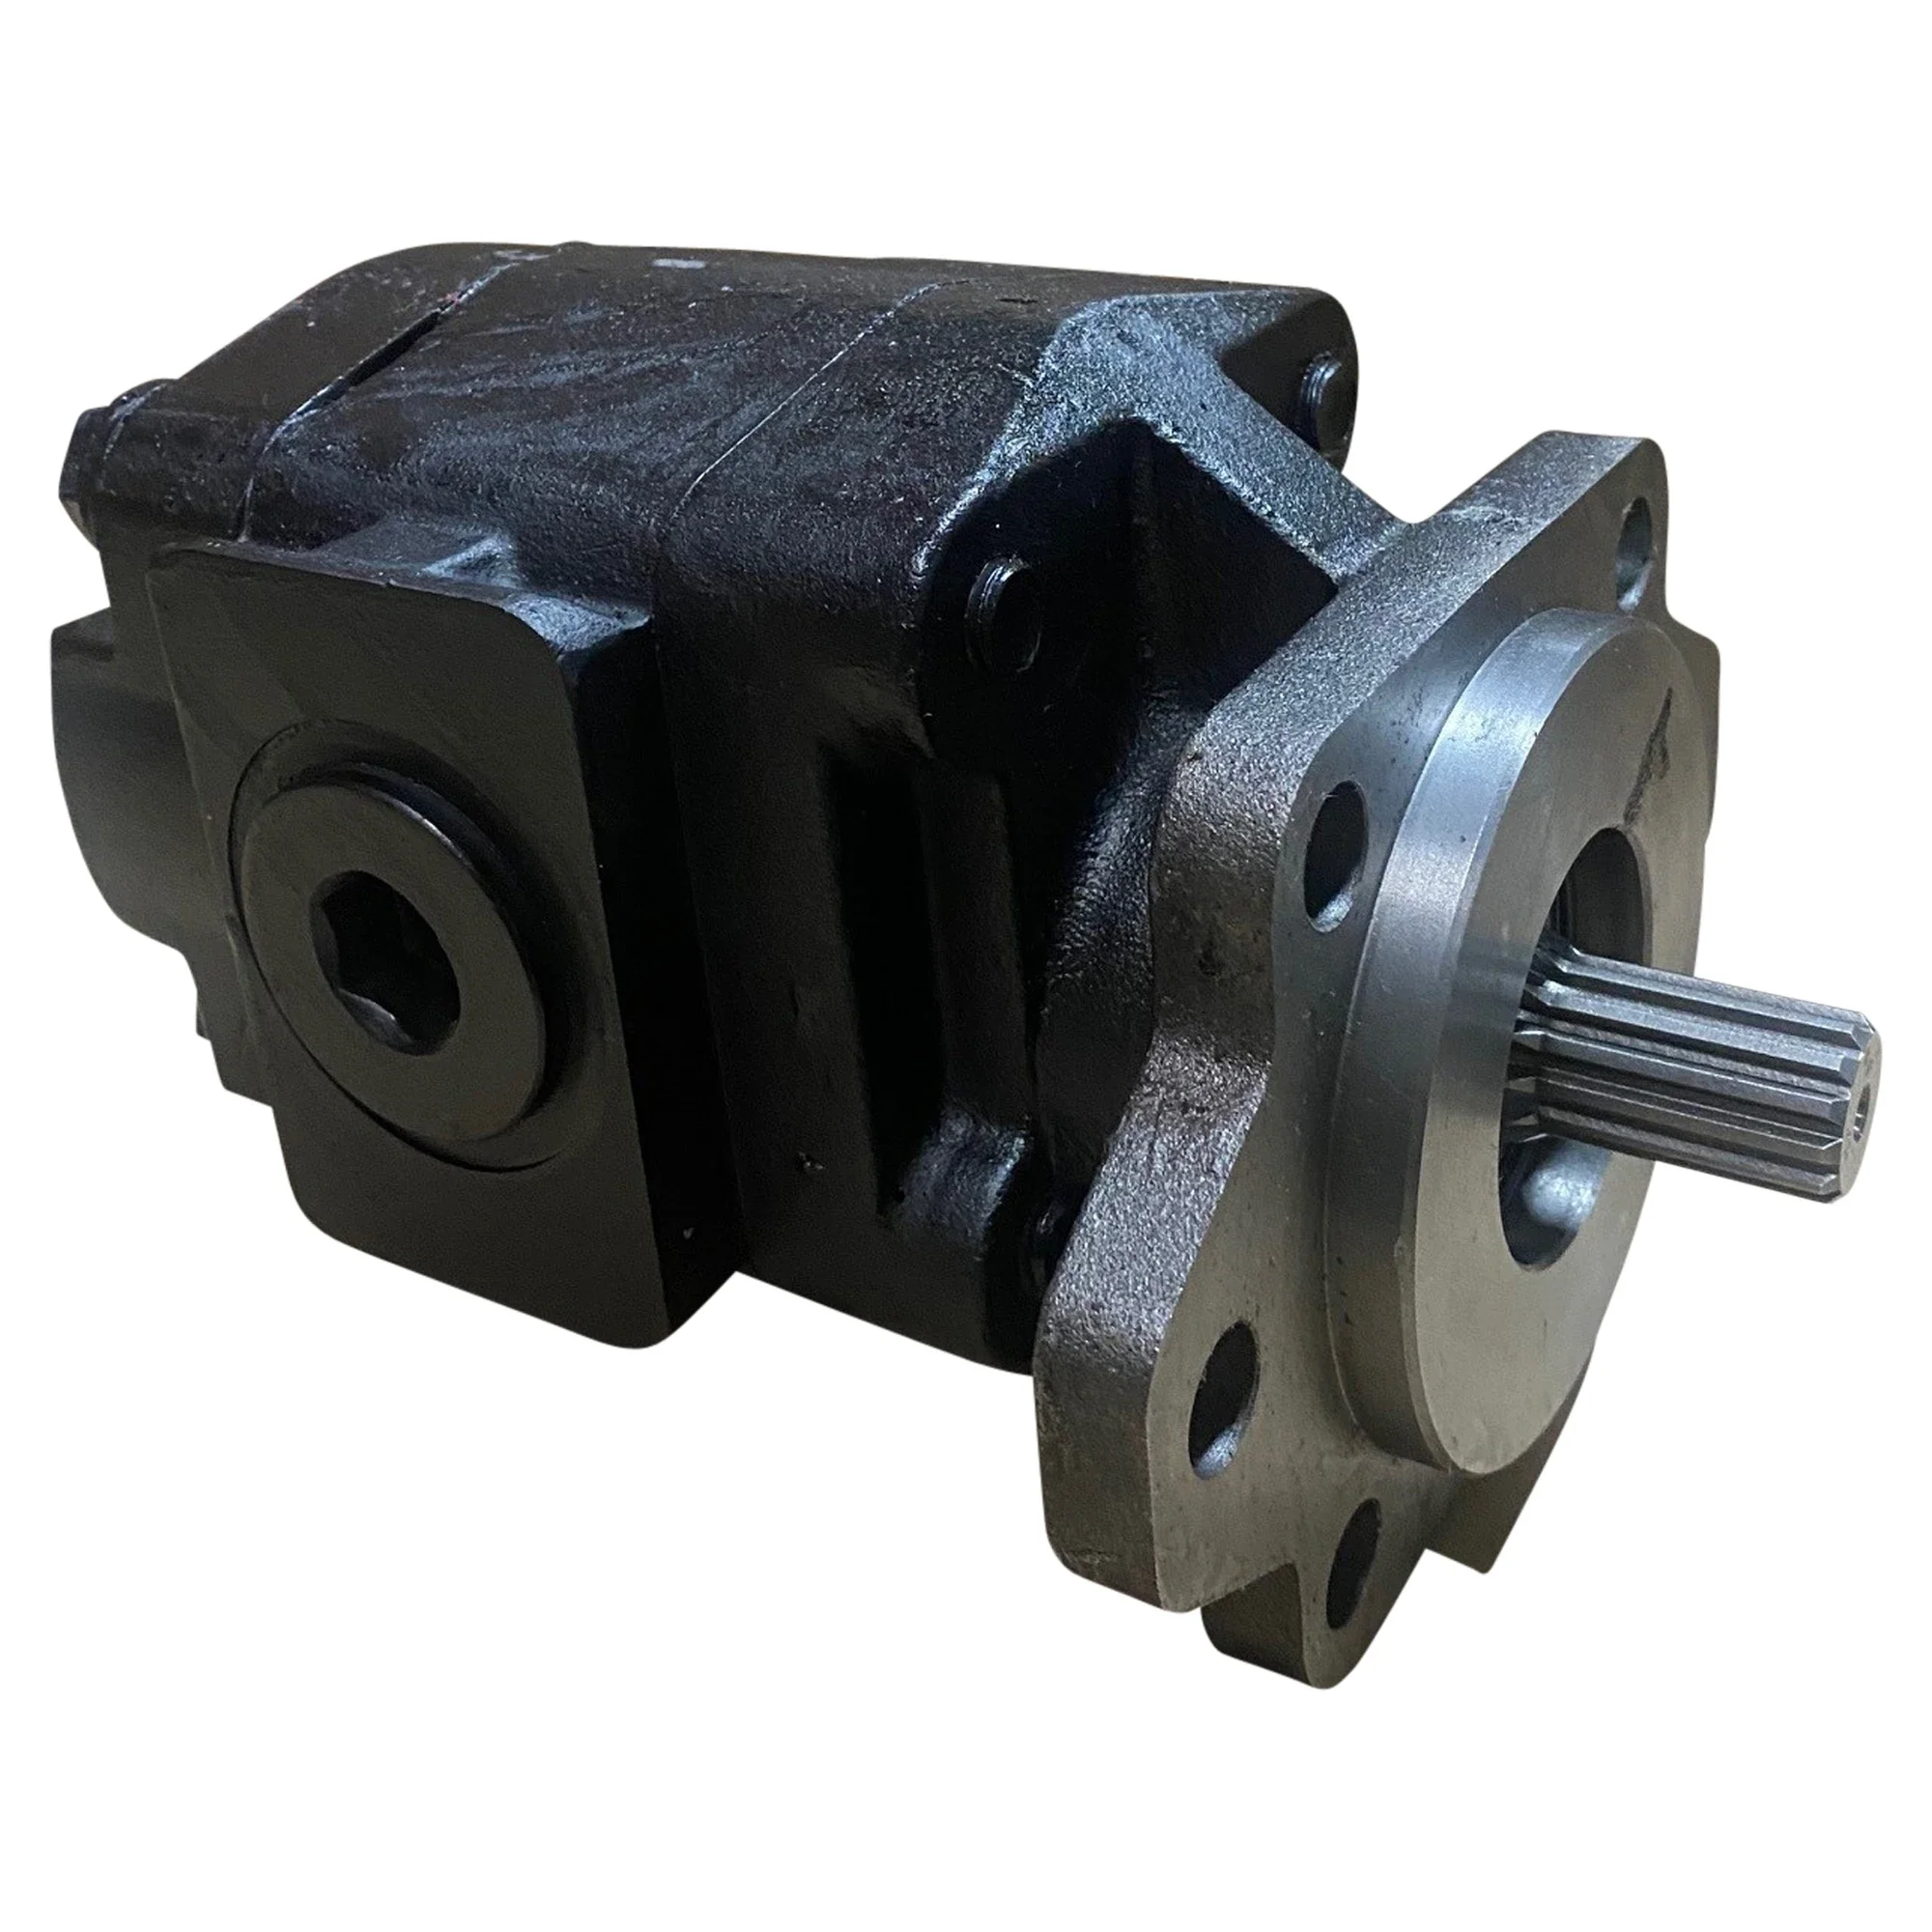 Wastebuilt® Replacement for New Way Pump\DM 20.5 GPM @ 1500 RPM